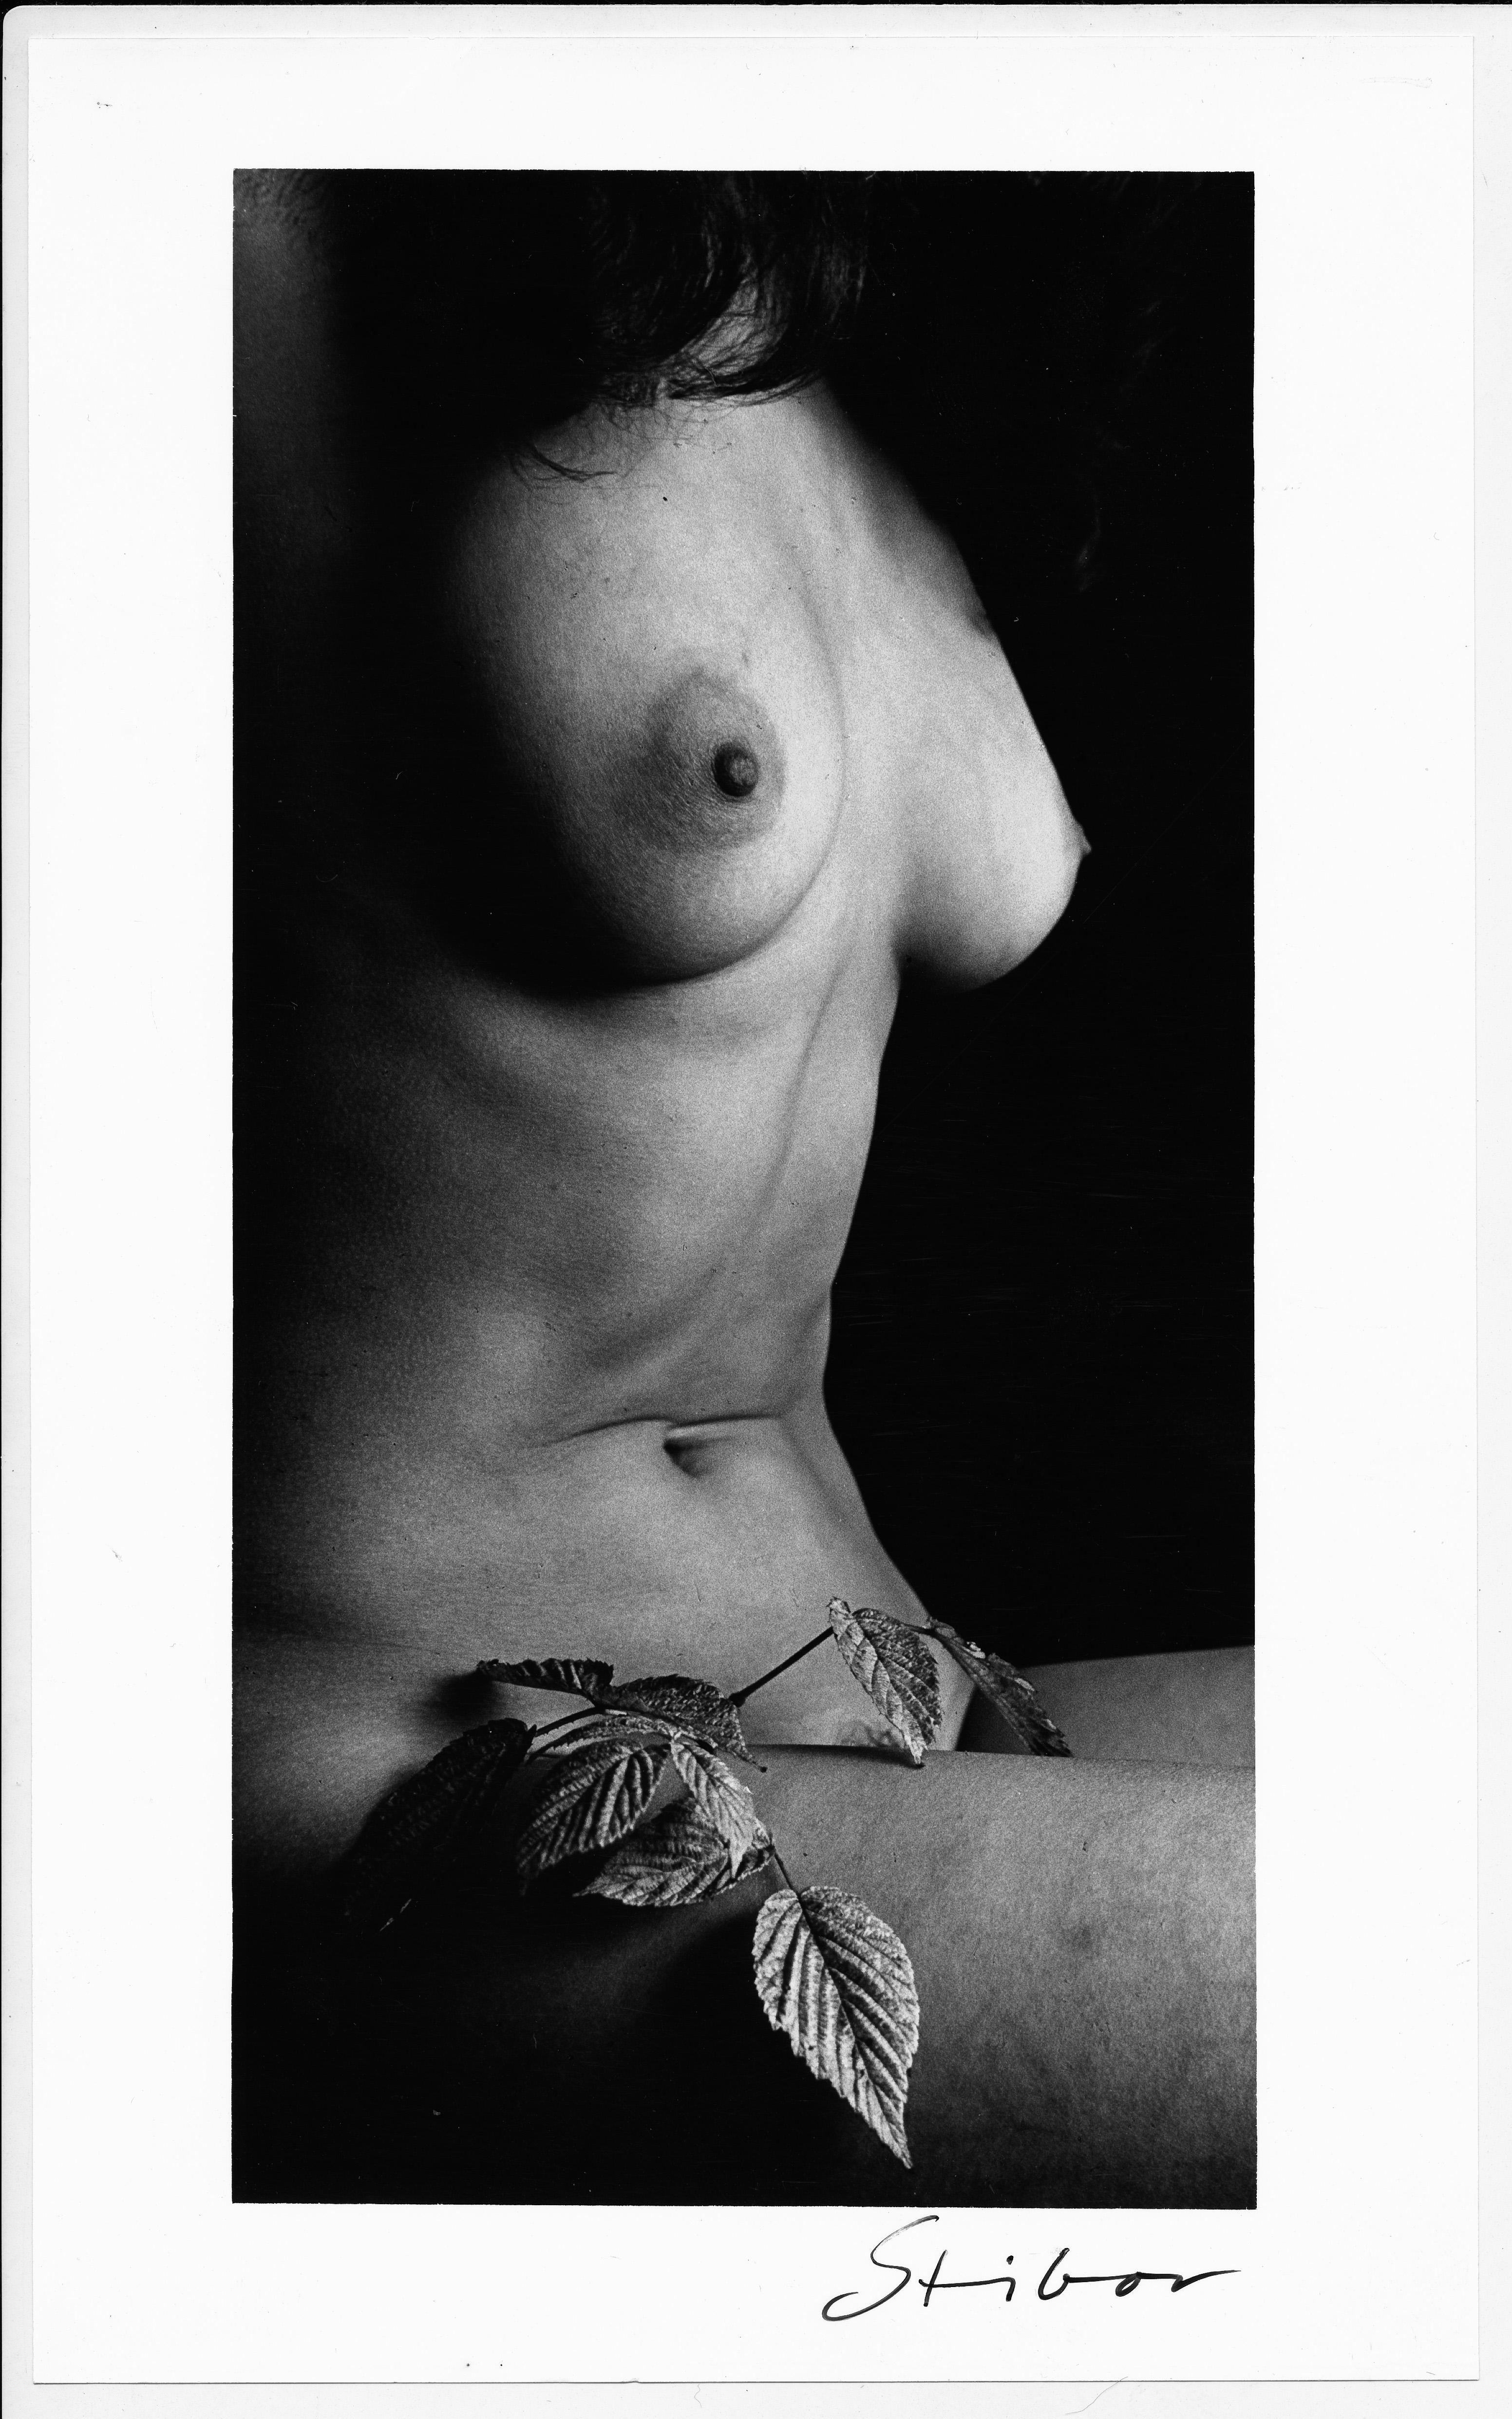 Nude Photography by Miroslav Stibor with original signature, circa 1960s or 1970s.

Miloslav Stibor born on July 11, 1927 in Olomouc - died on March 7, 2011, was a famous Czech photographer and university teacher. His major works took place in the